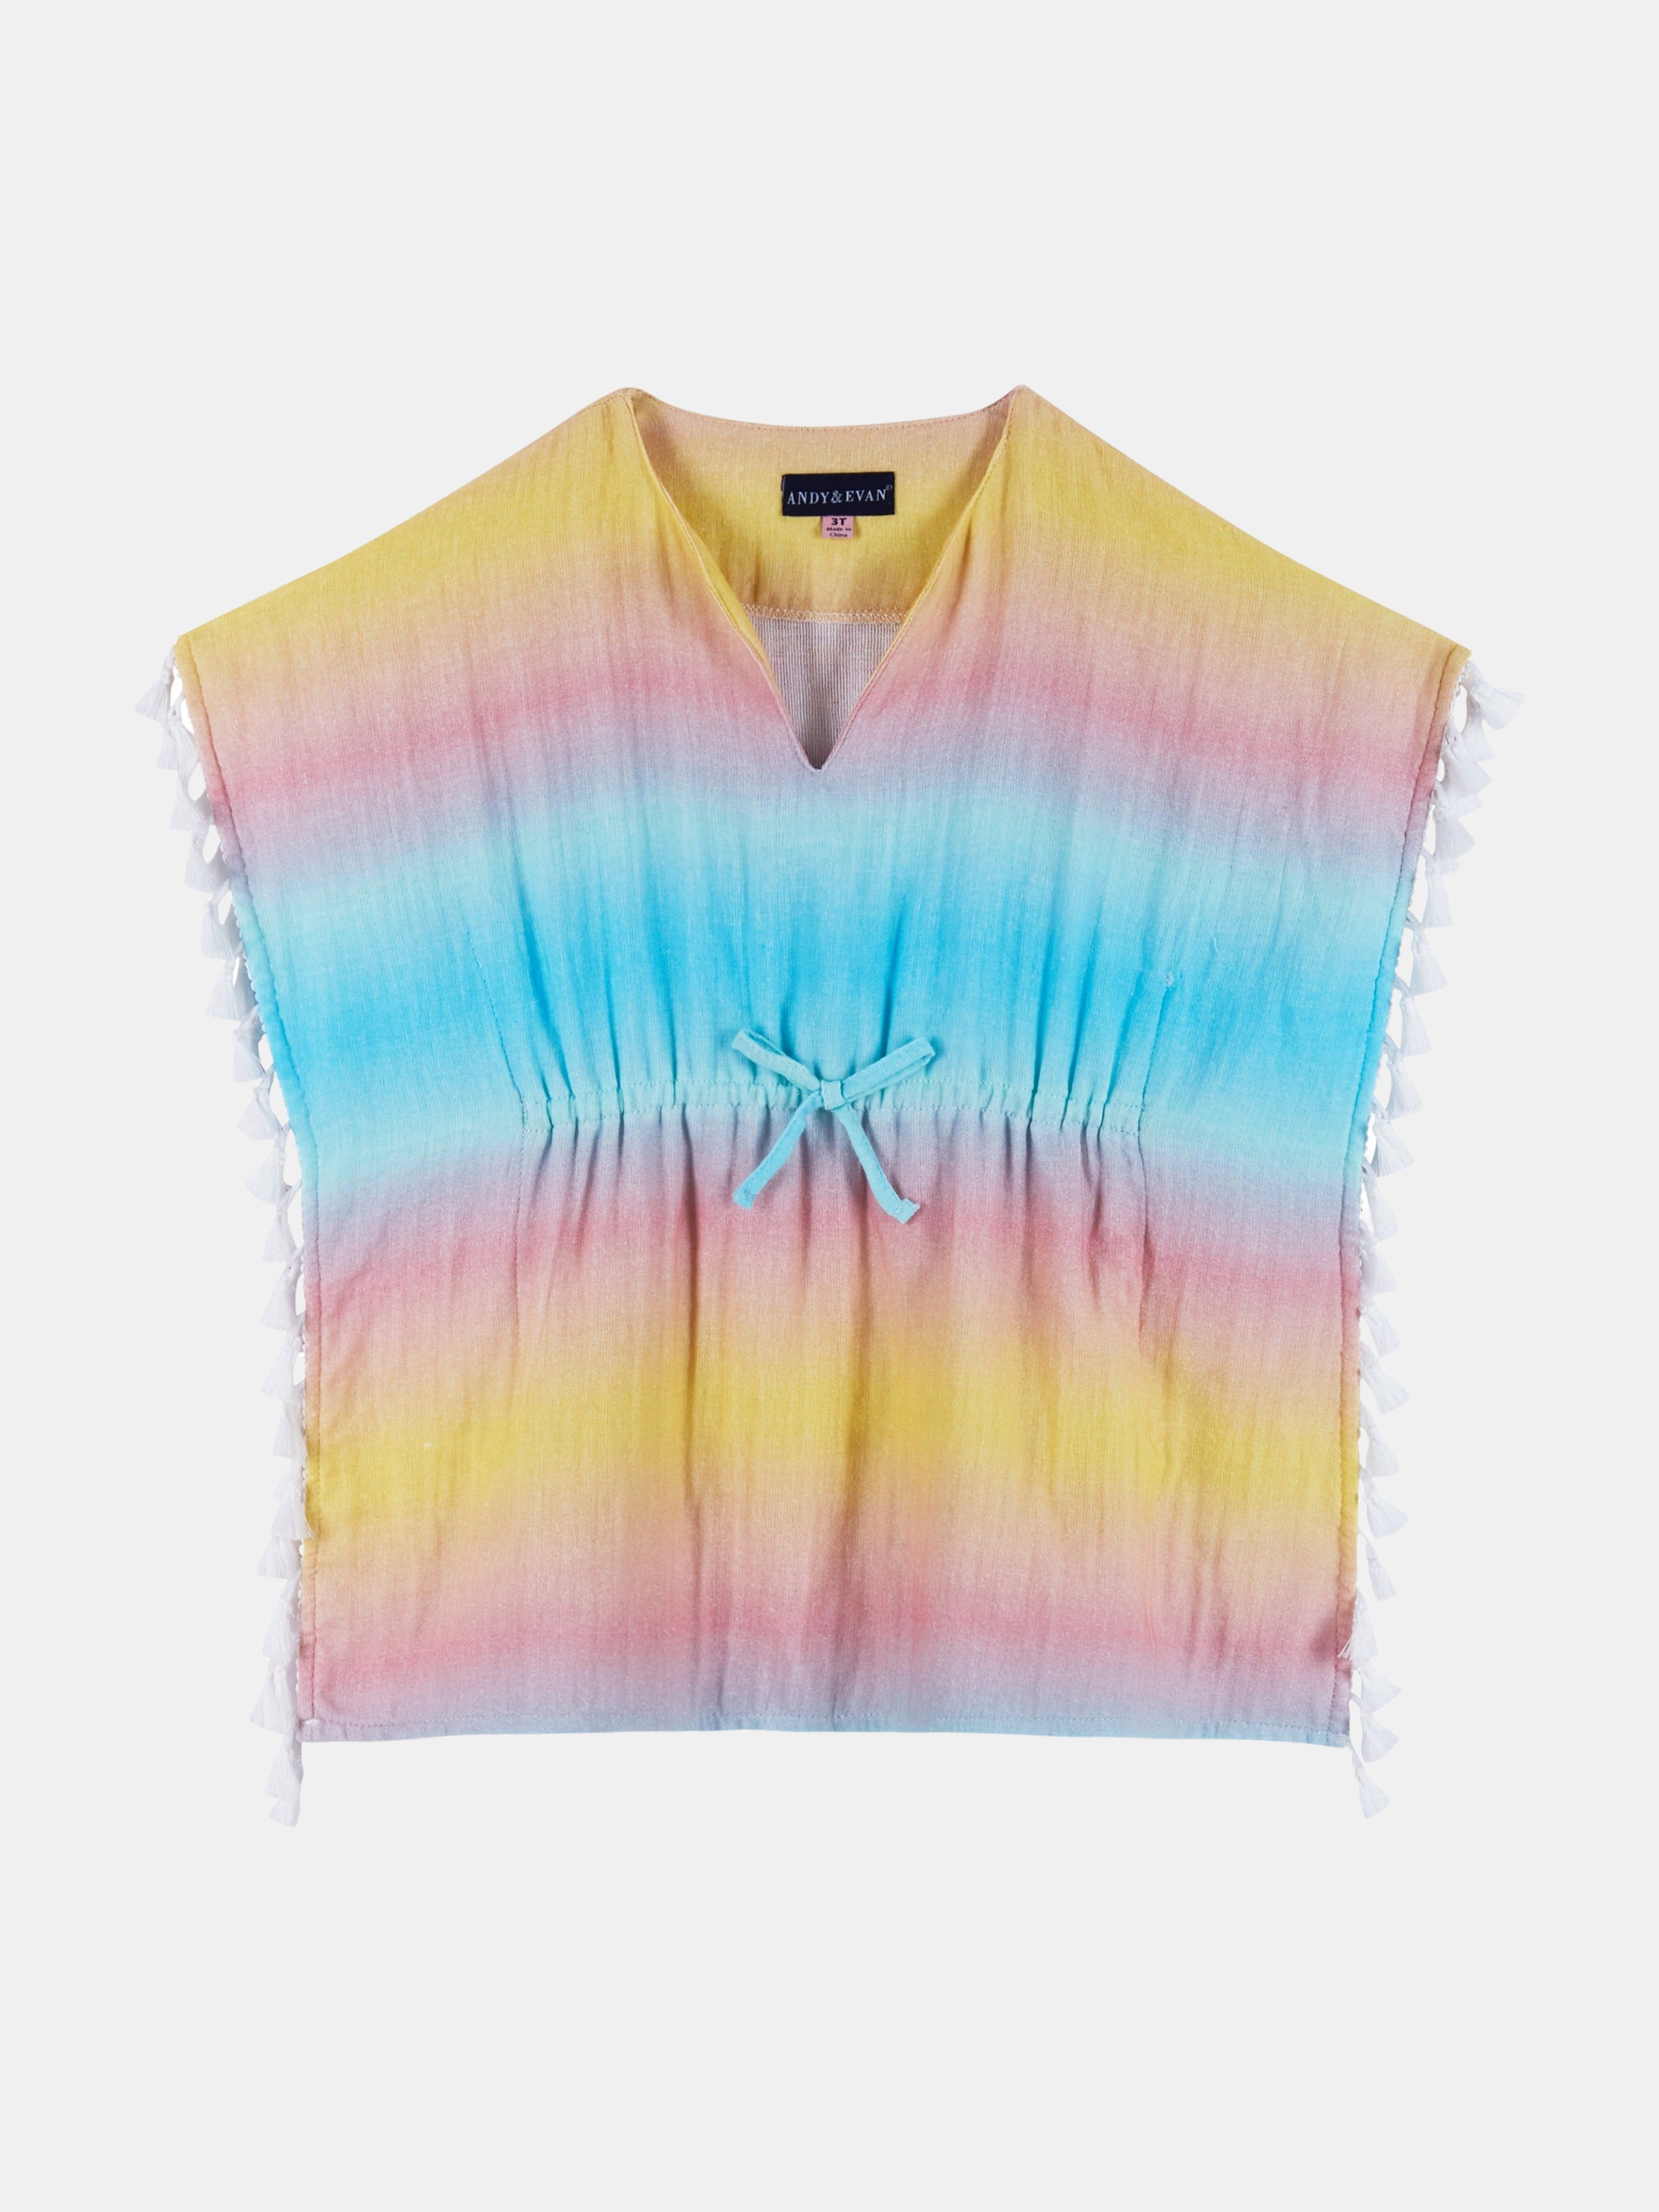 ANDY & EVAN ANDY & EVAN GIRLS OMBRE COVER-UP